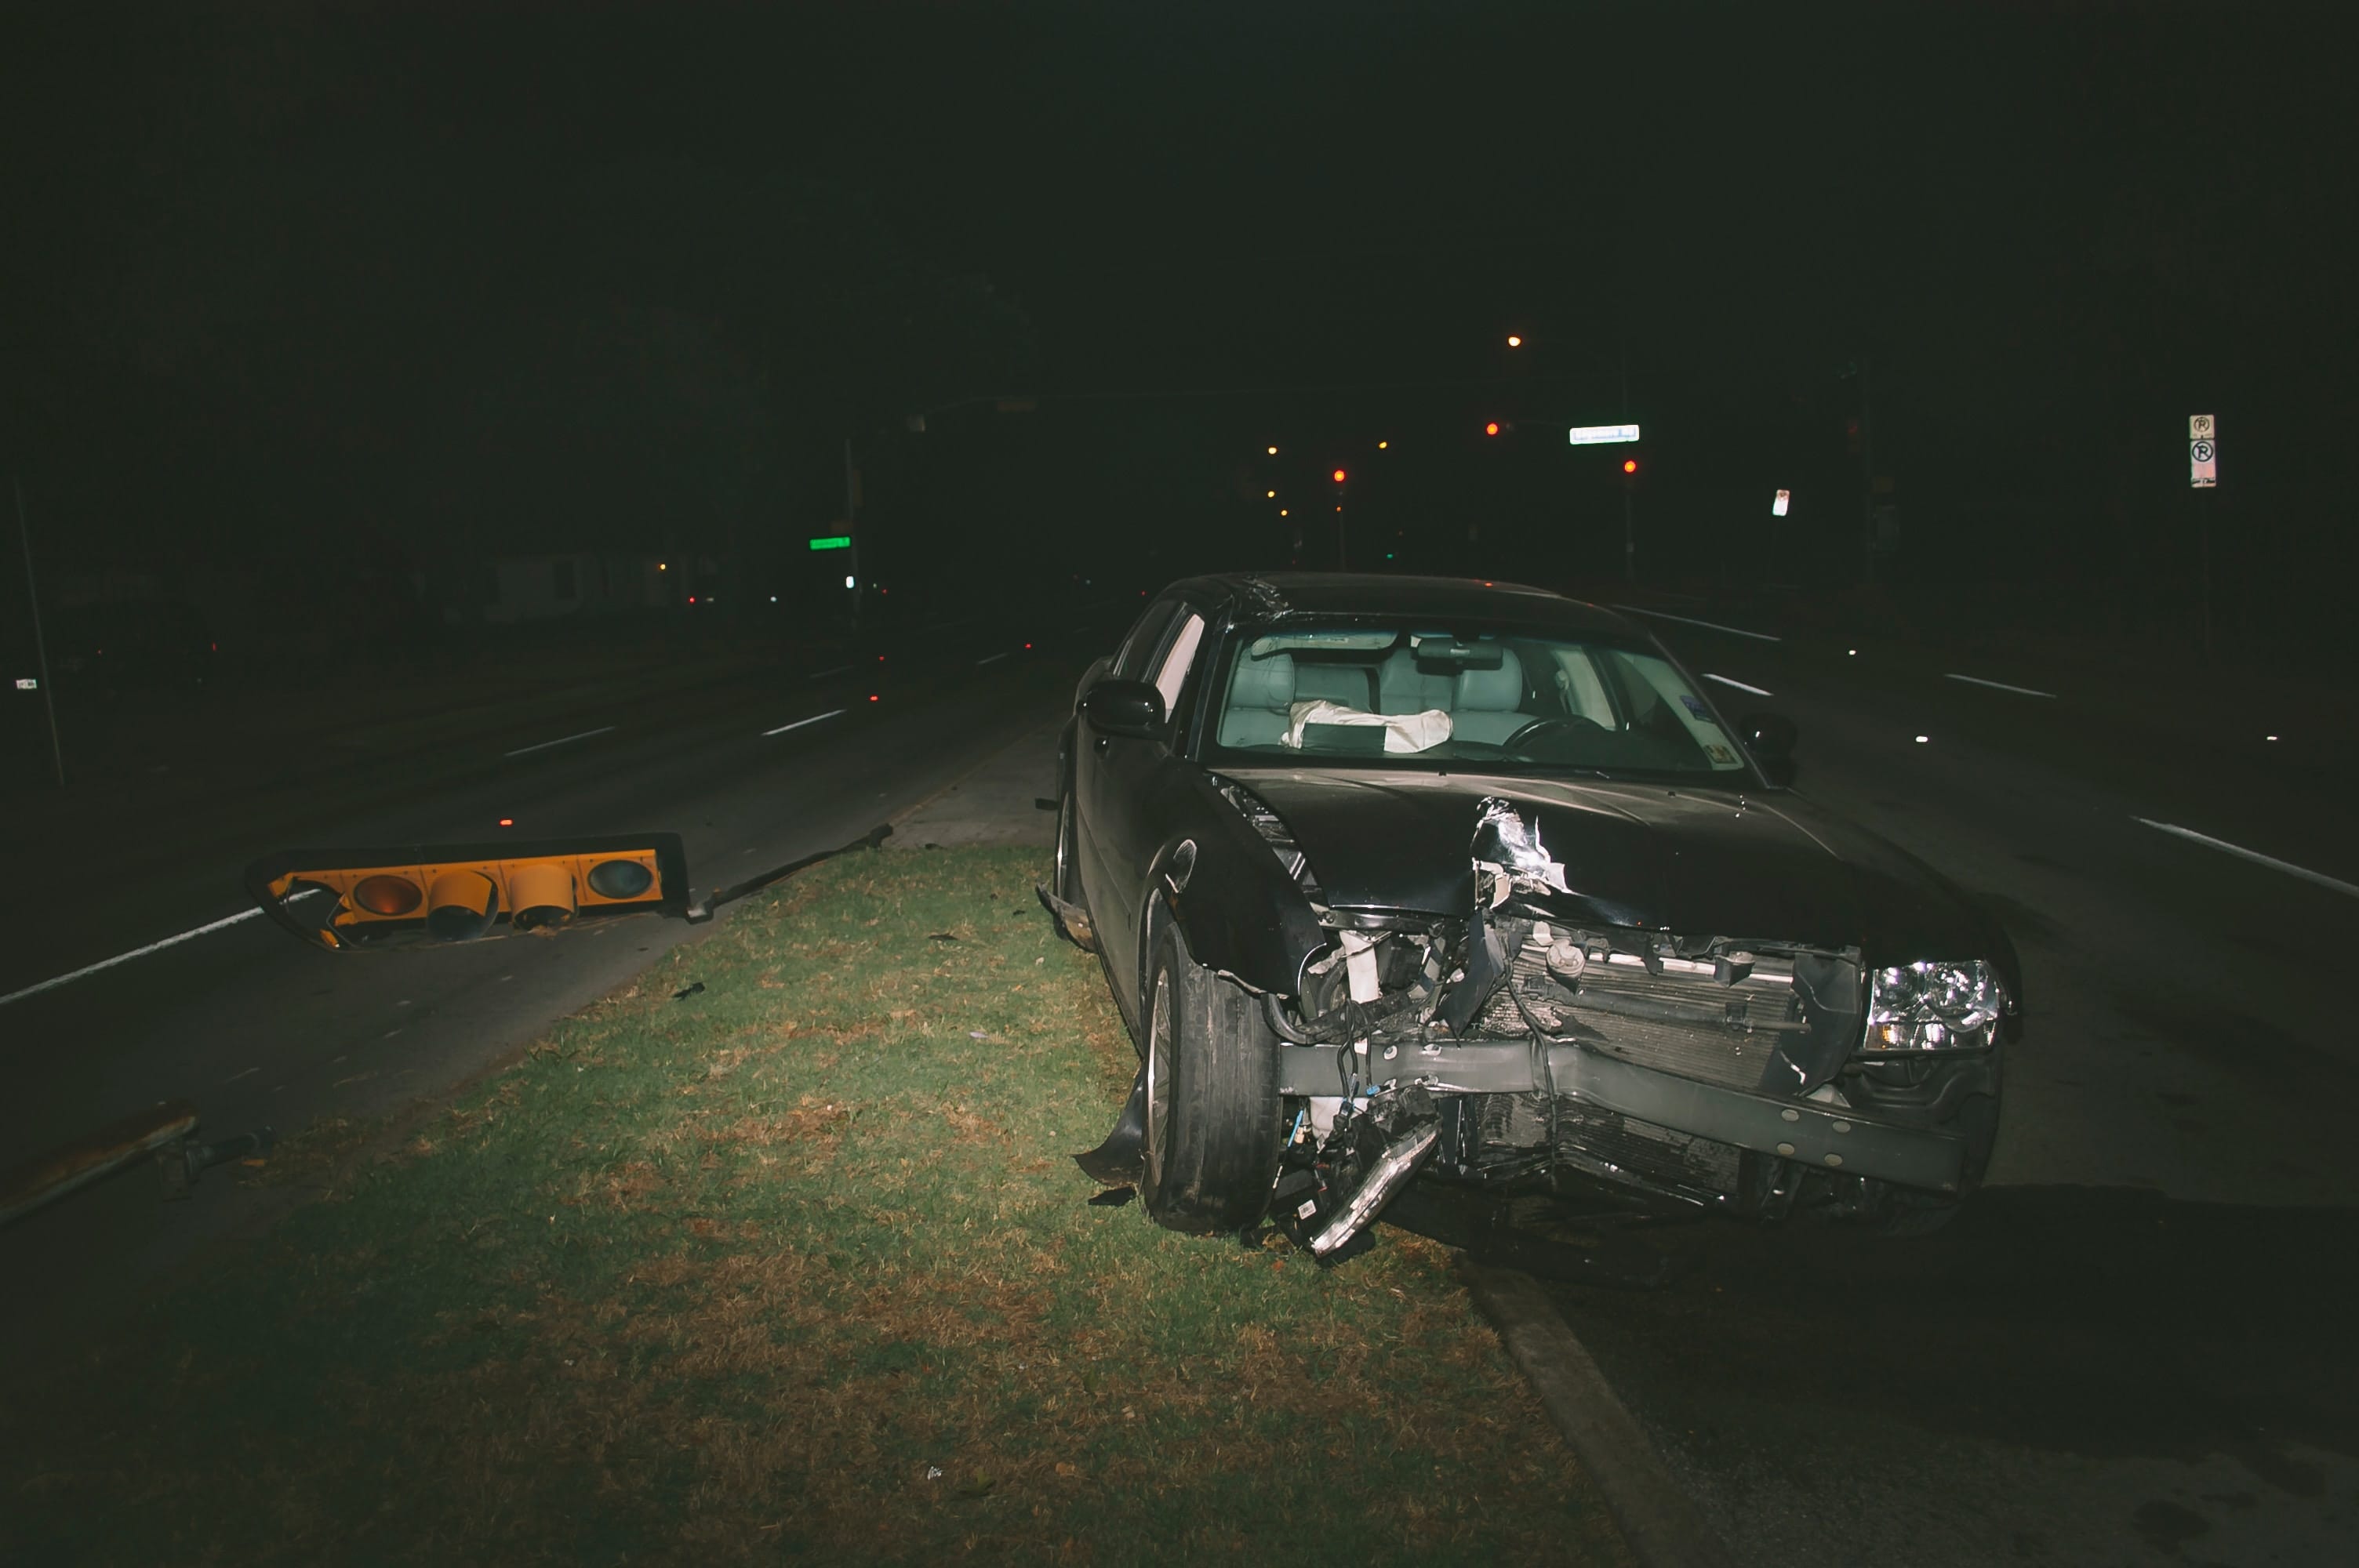 A wrecked black car on the road at night; image by Matthew T. Rader, via unsplash.com.